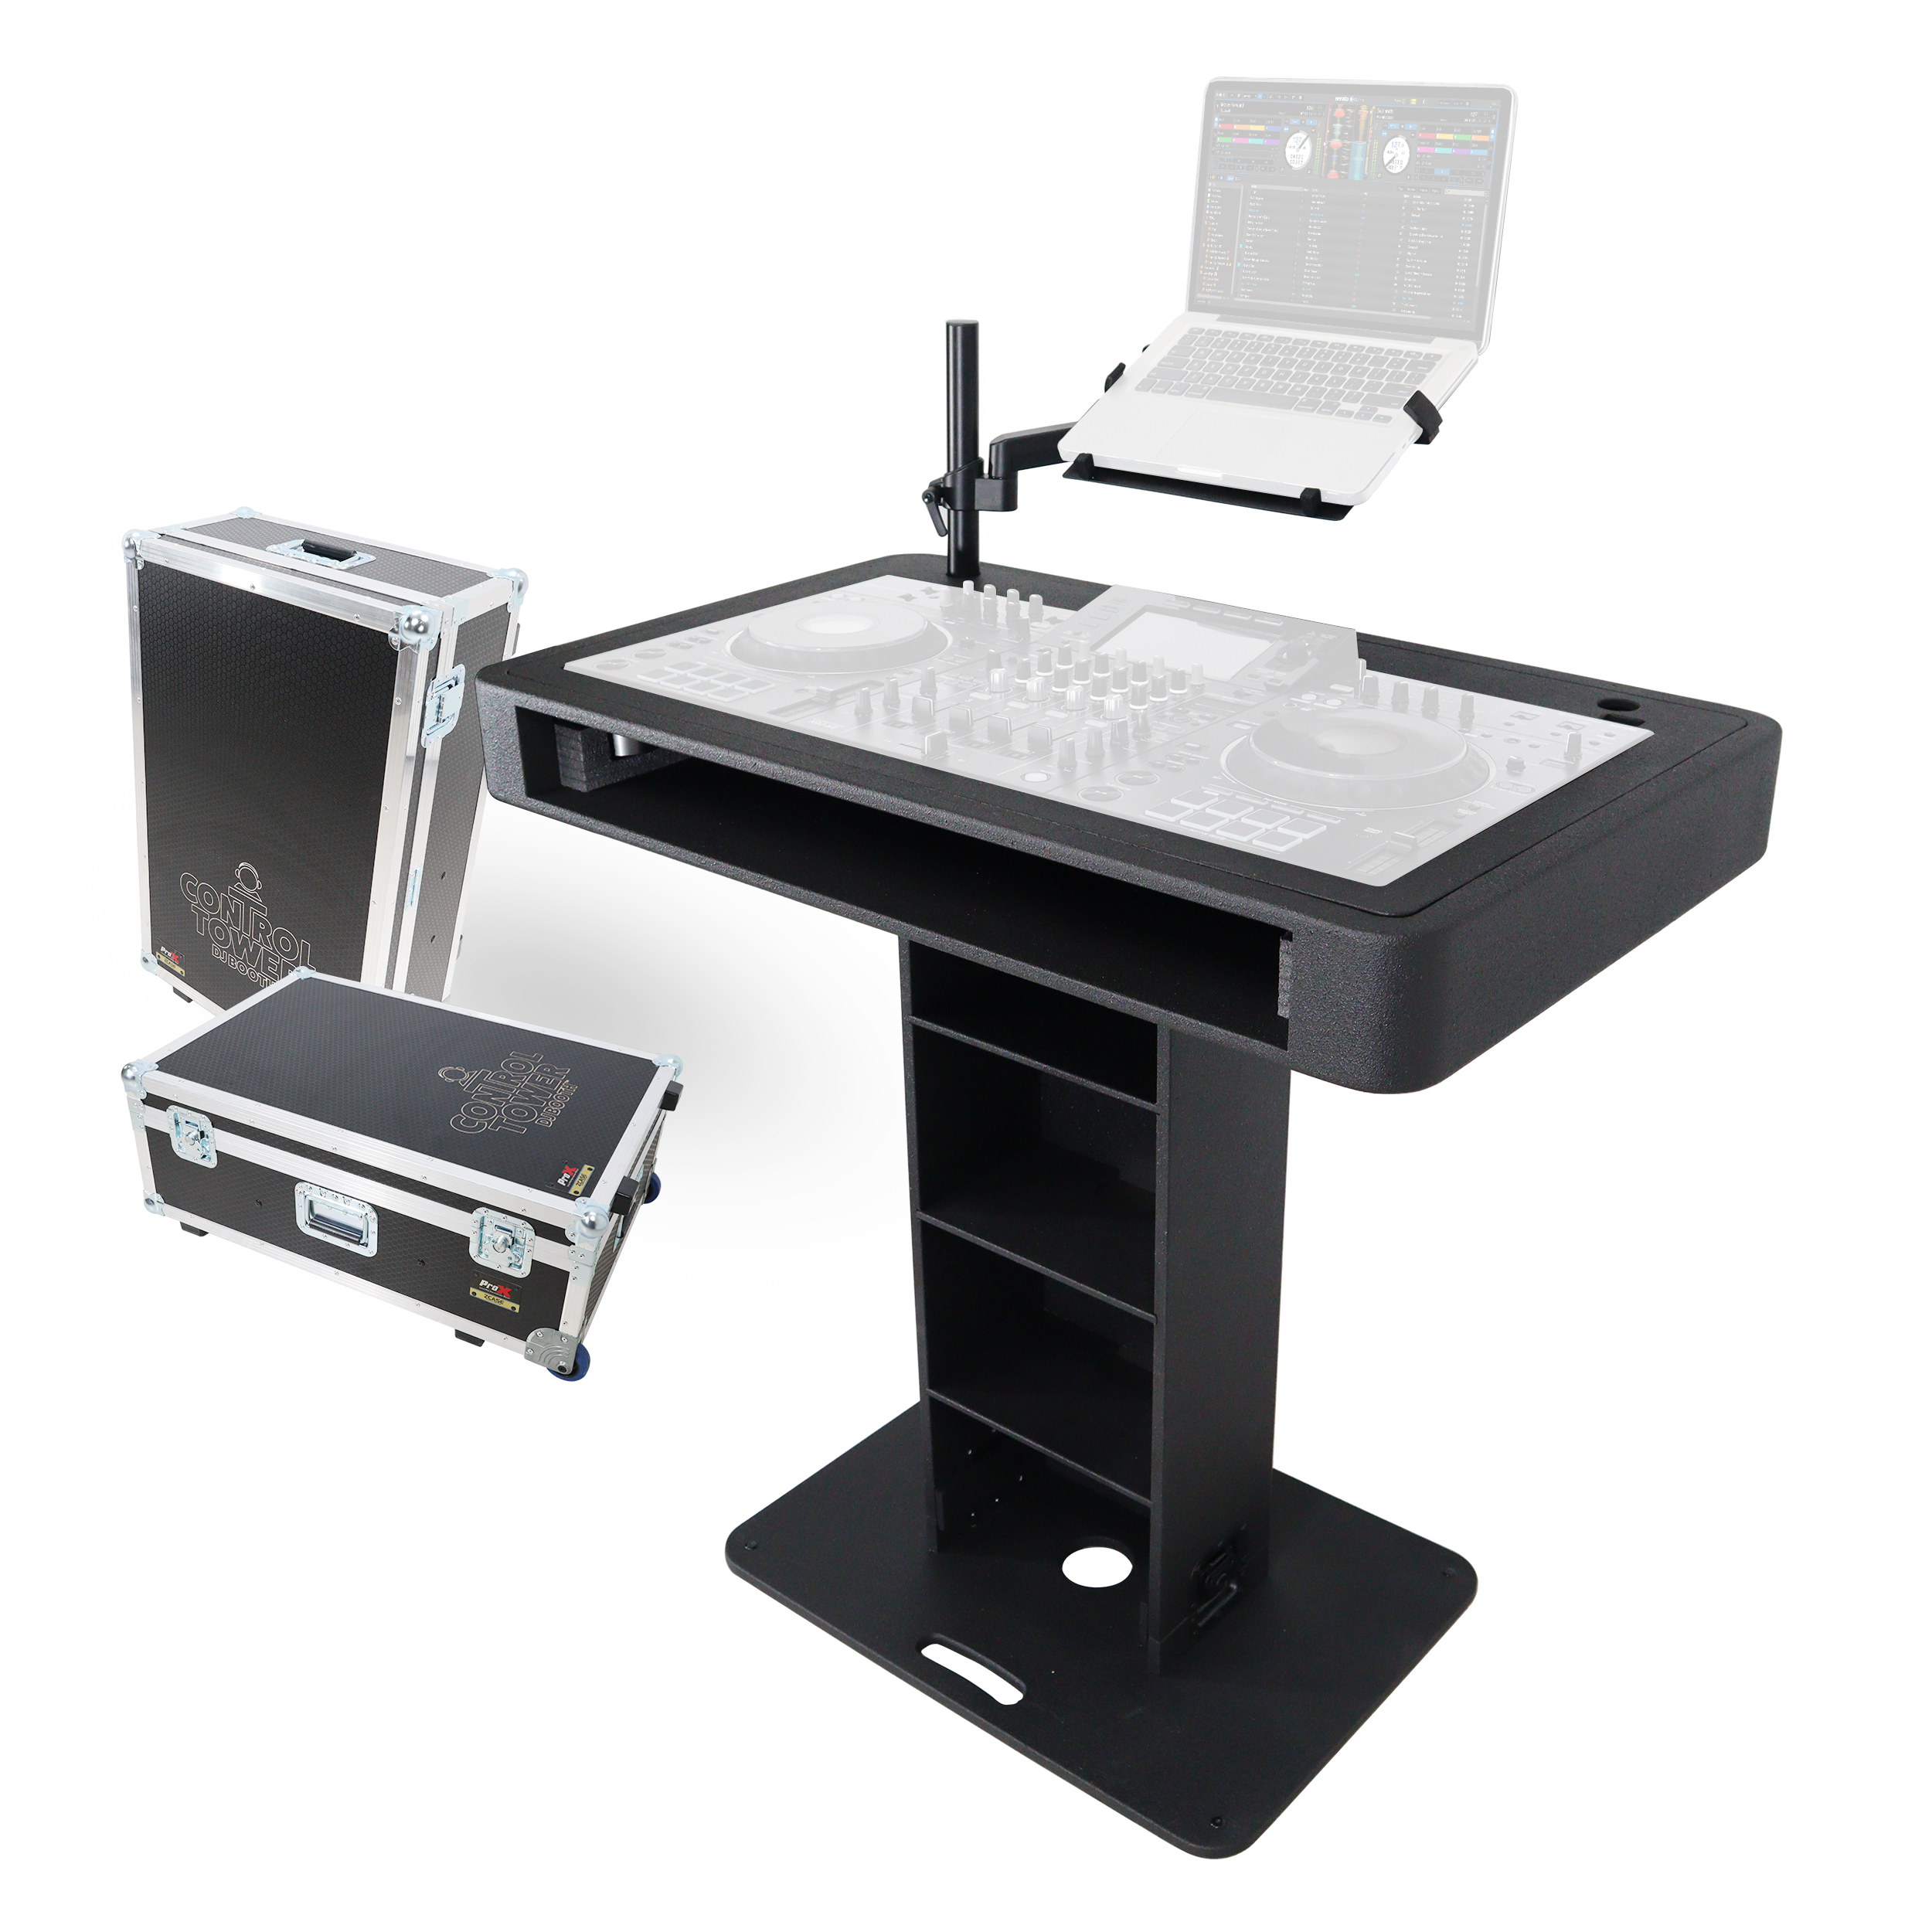 prox-xzf-djct-bl-case--control-tower-dj-booth-w--laptop-stand-and-flight-cases.jpg